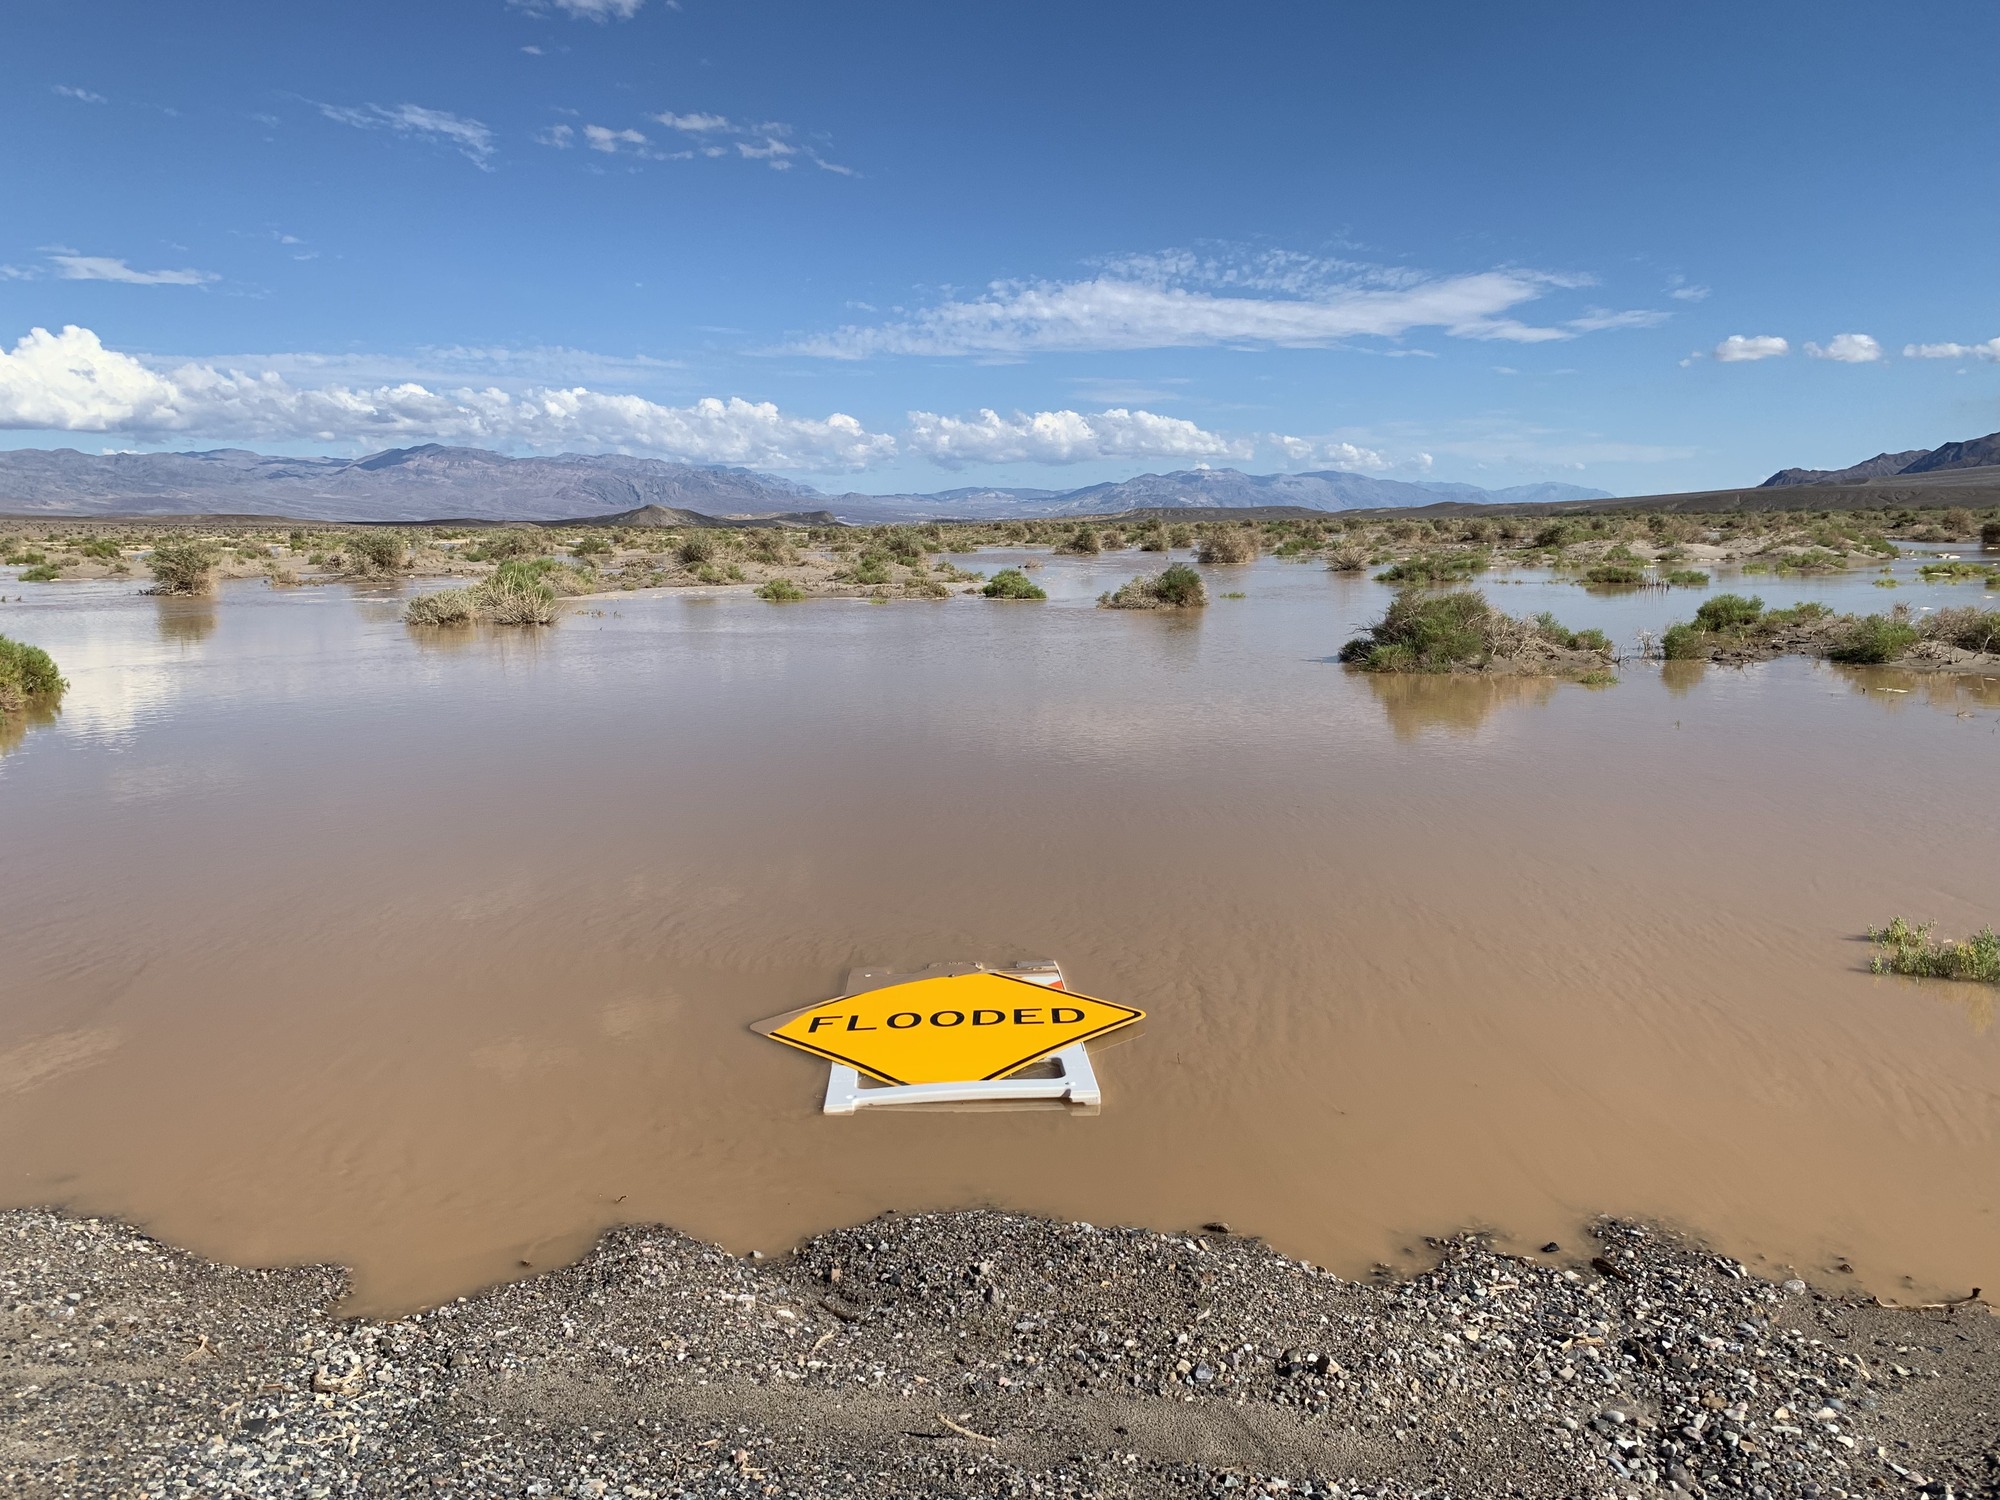 a yellow sign that says flooded floating in water in a desert environment